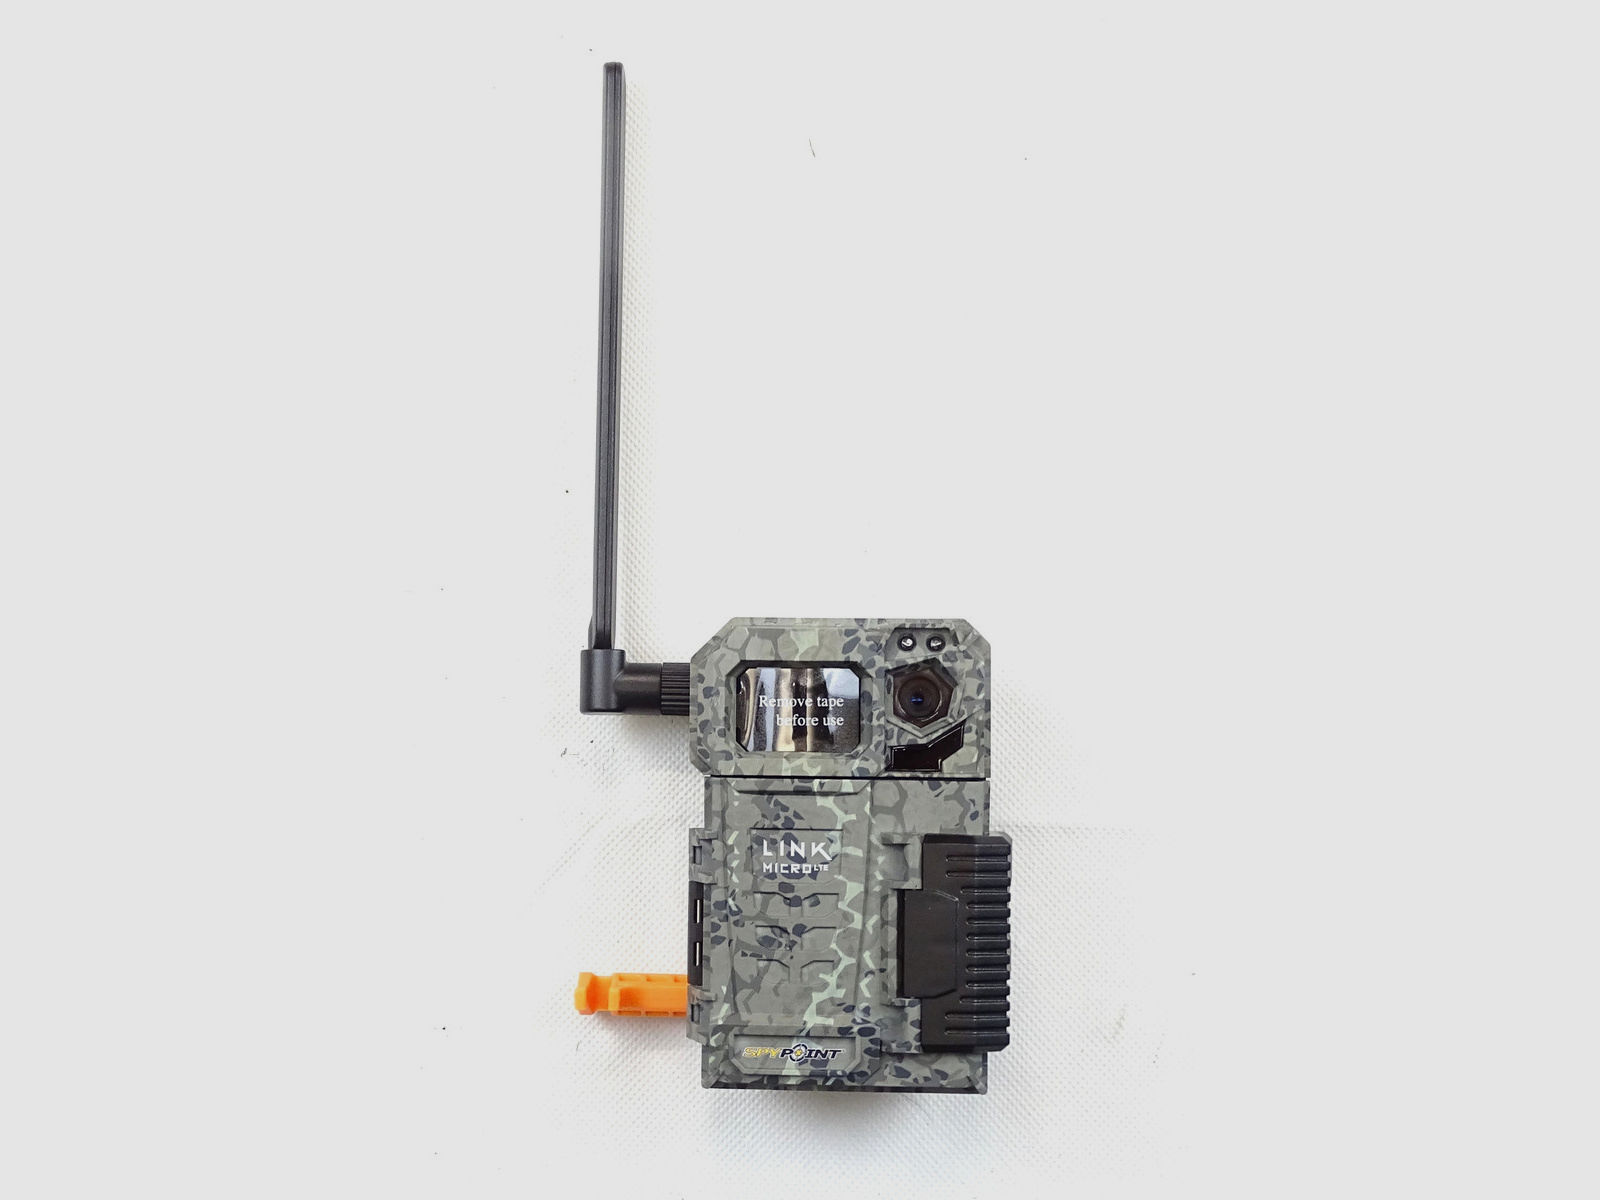 Spypoint Link-Mikro-LTE